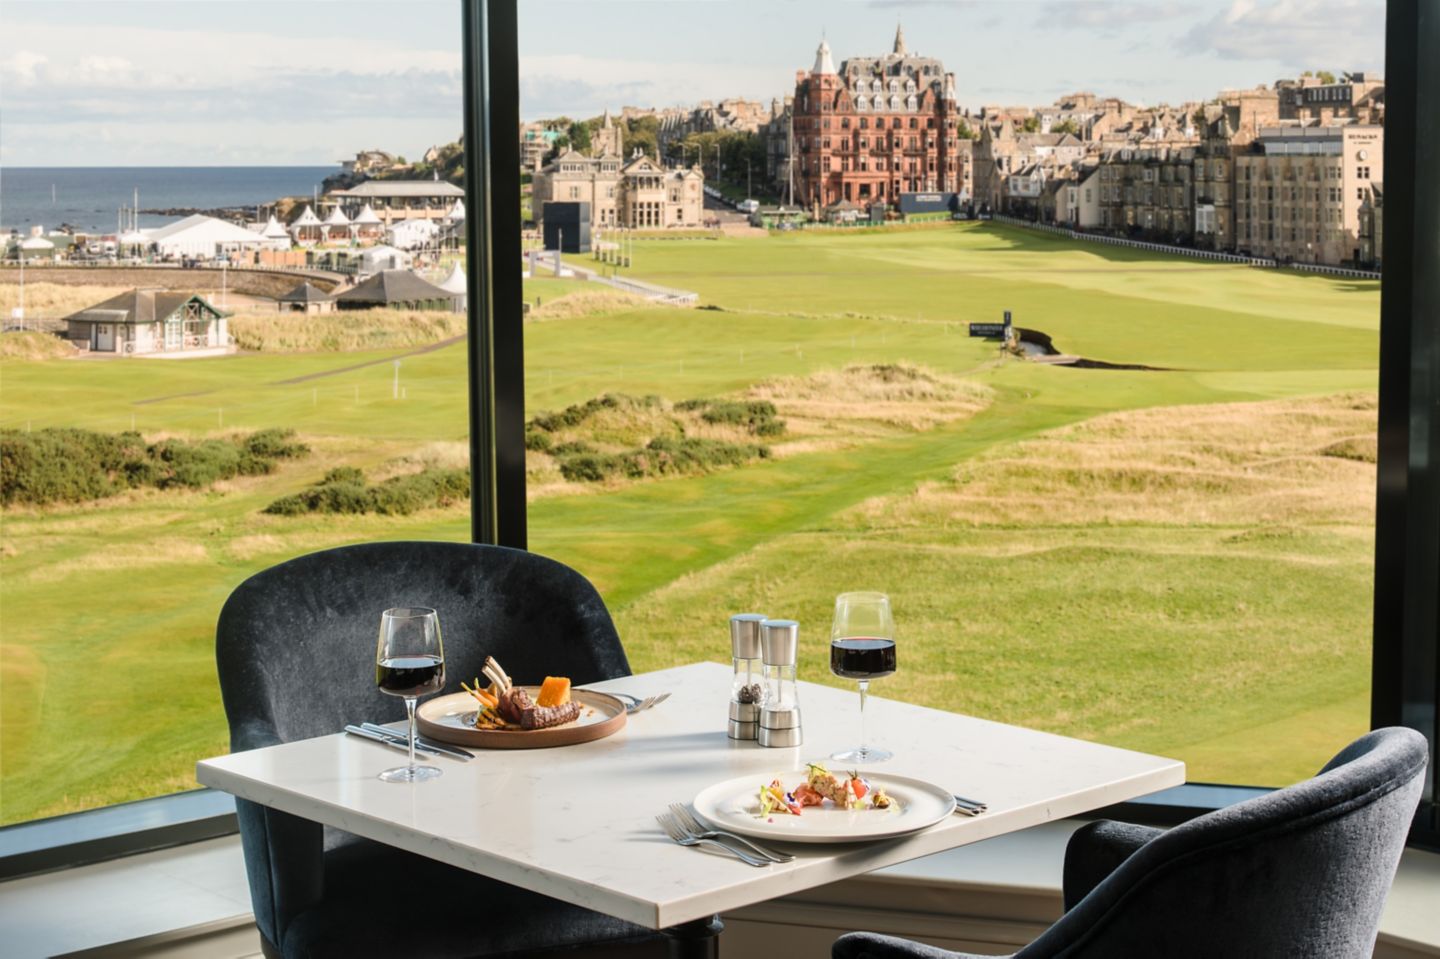 Dining in St Andrews